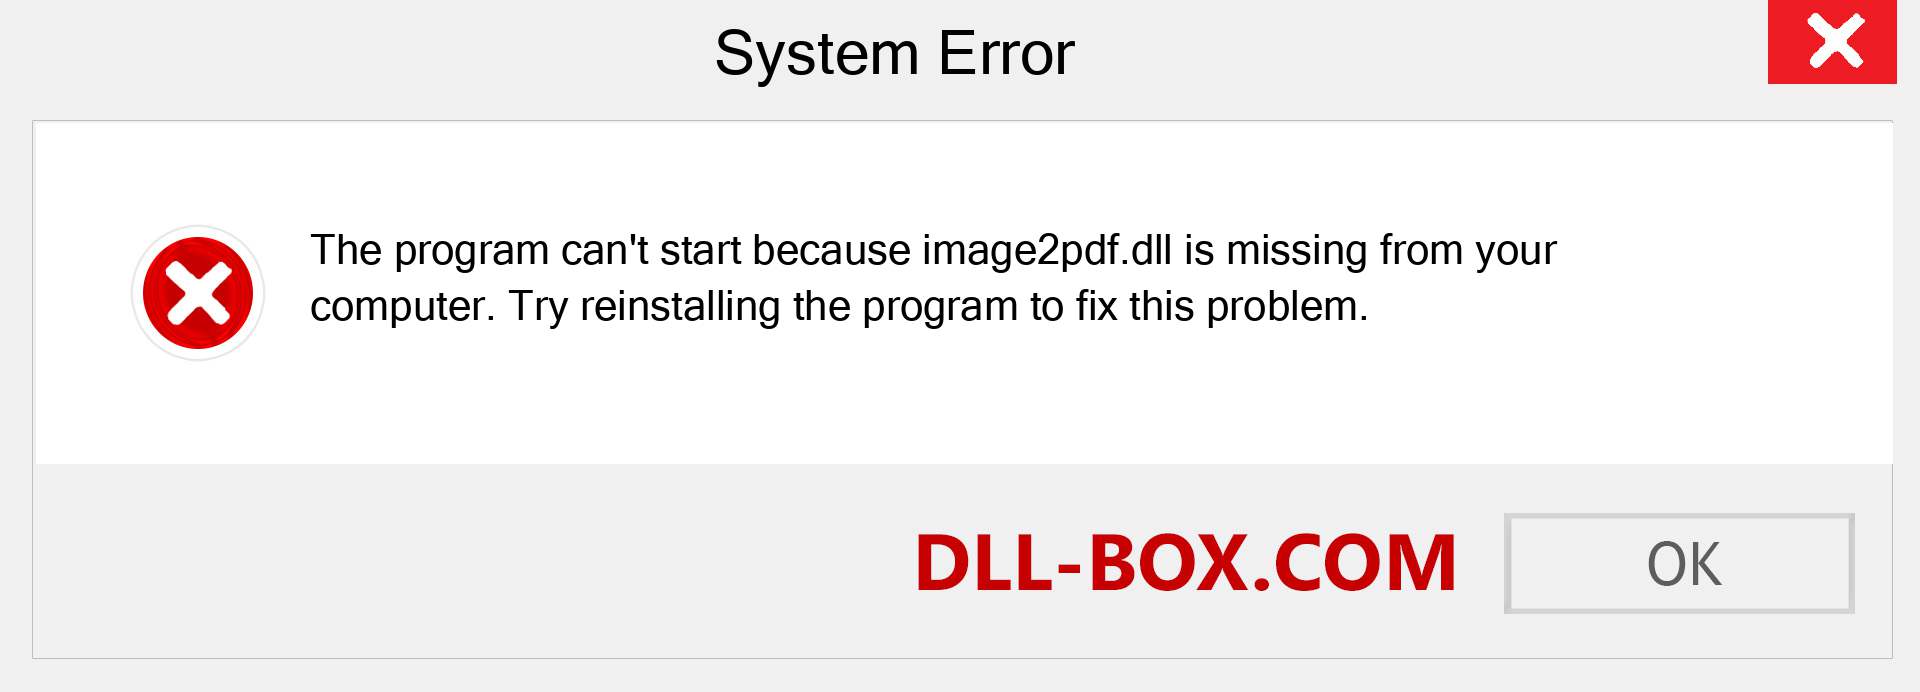  image2pdf.dll file is missing?. Download for Windows 7, 8, 10 - Fix  image2pdf dll Missing Error on Windows, photos, images